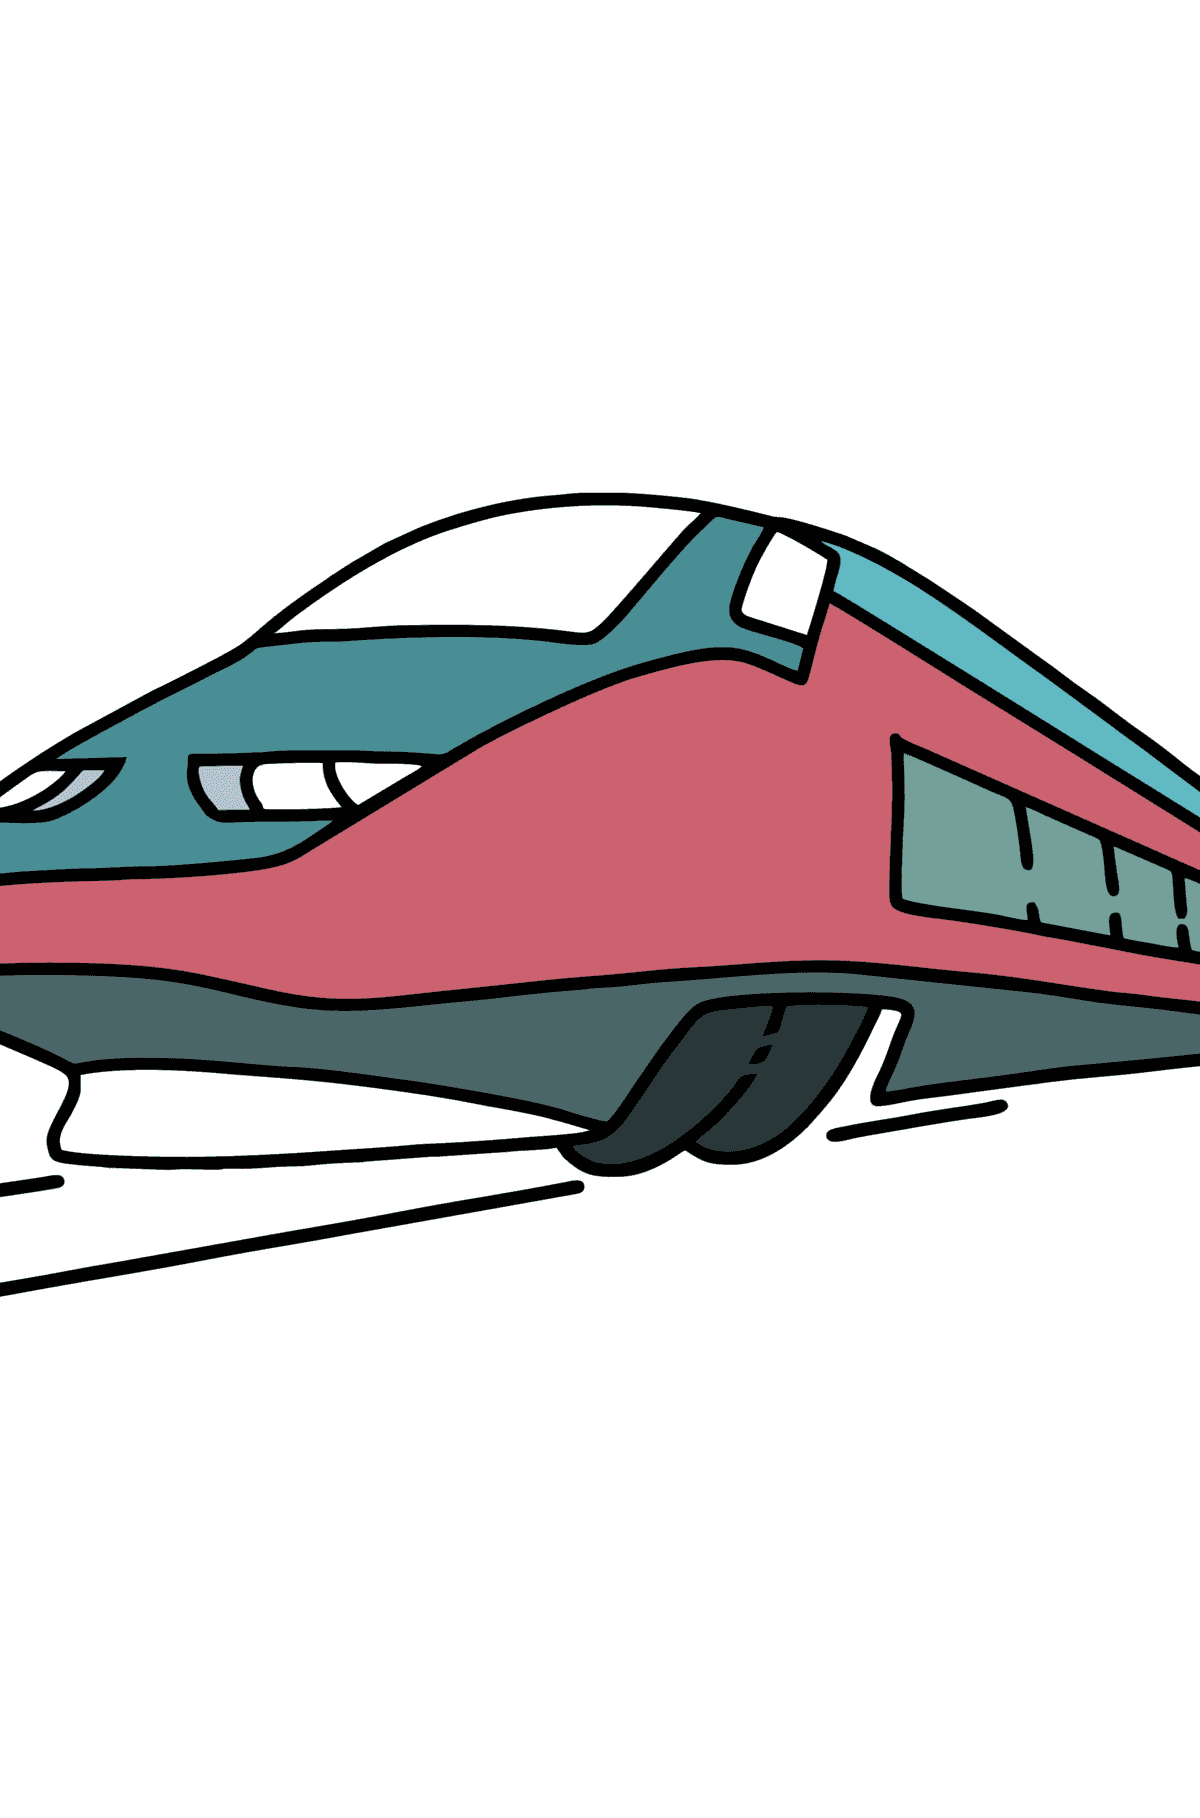 Train coloring page for kids - Coloring Pages for Kids